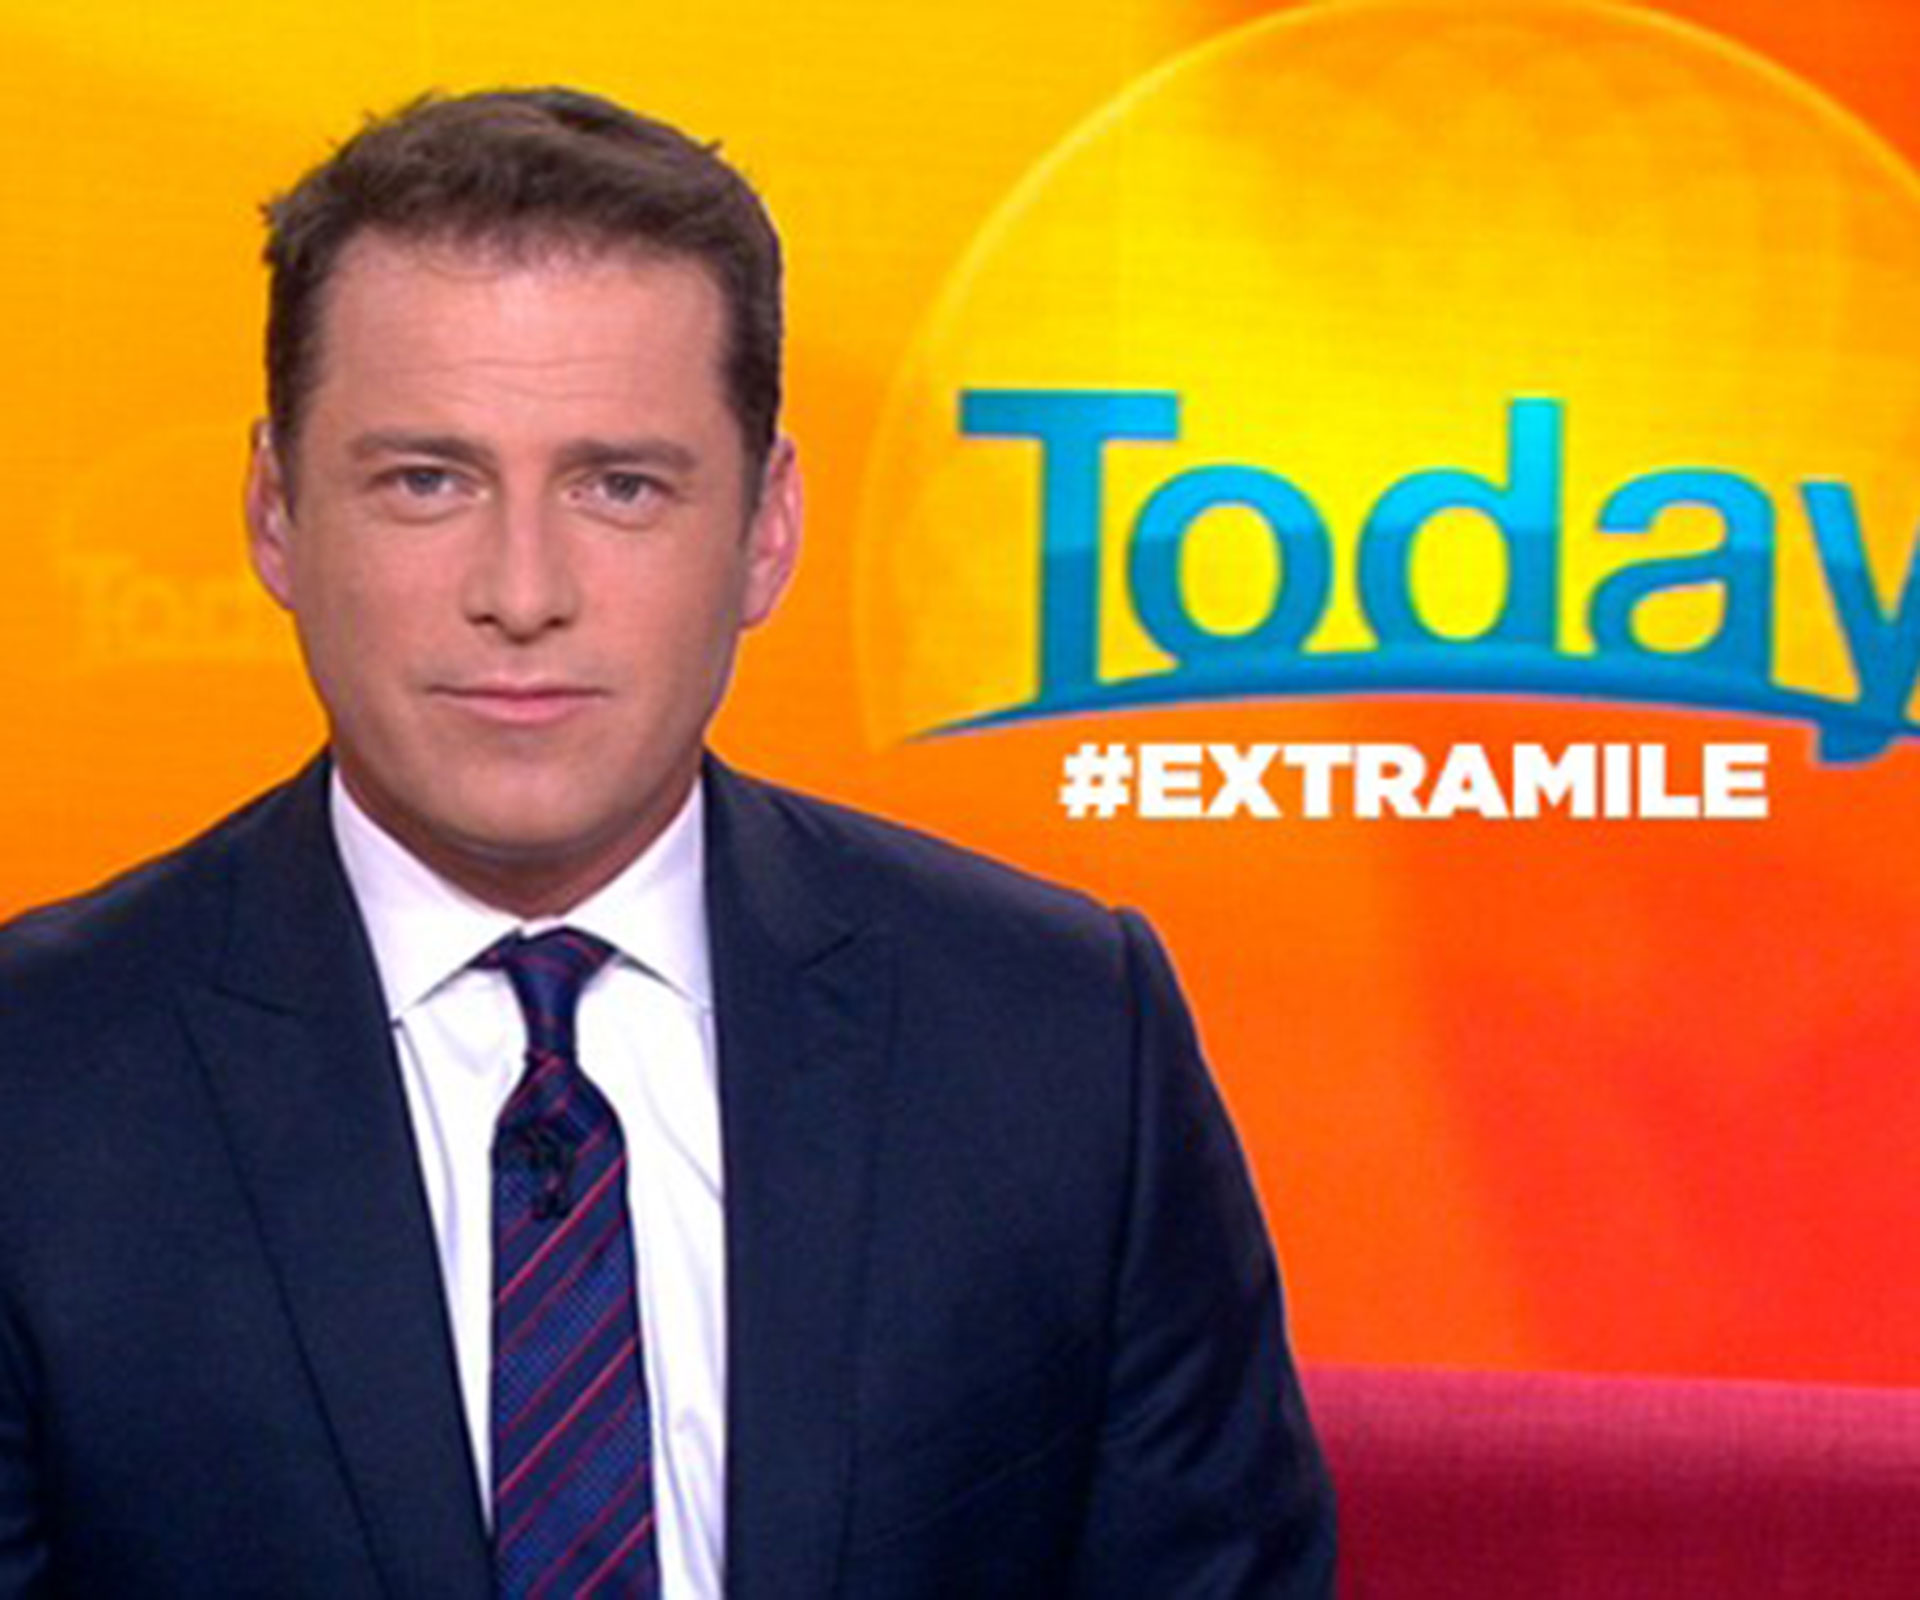 Karl Stefanovic has not quit Today, say Nine bosses